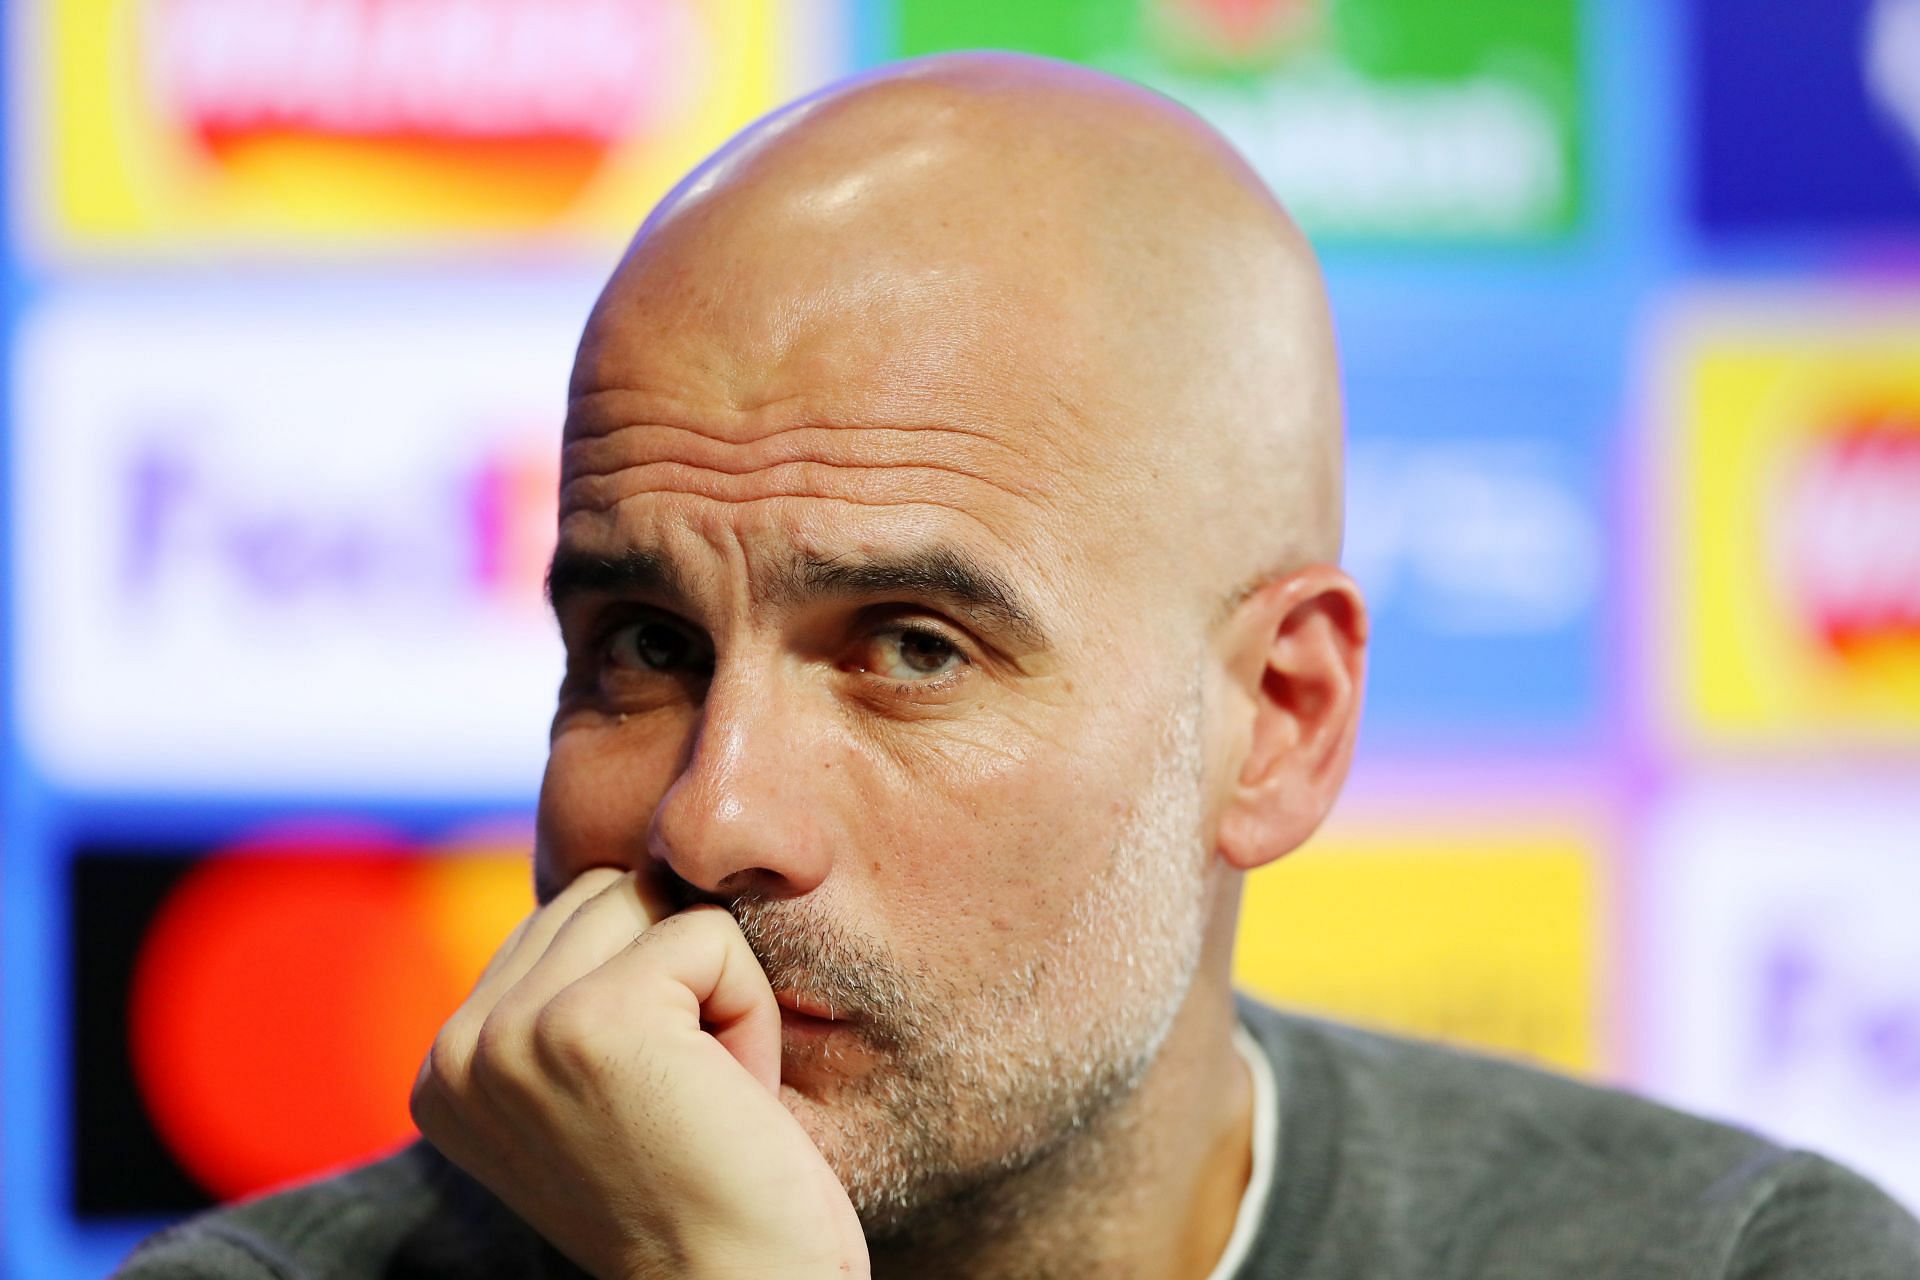 Manchester City boss Pep Guardiola looks on during a press conference